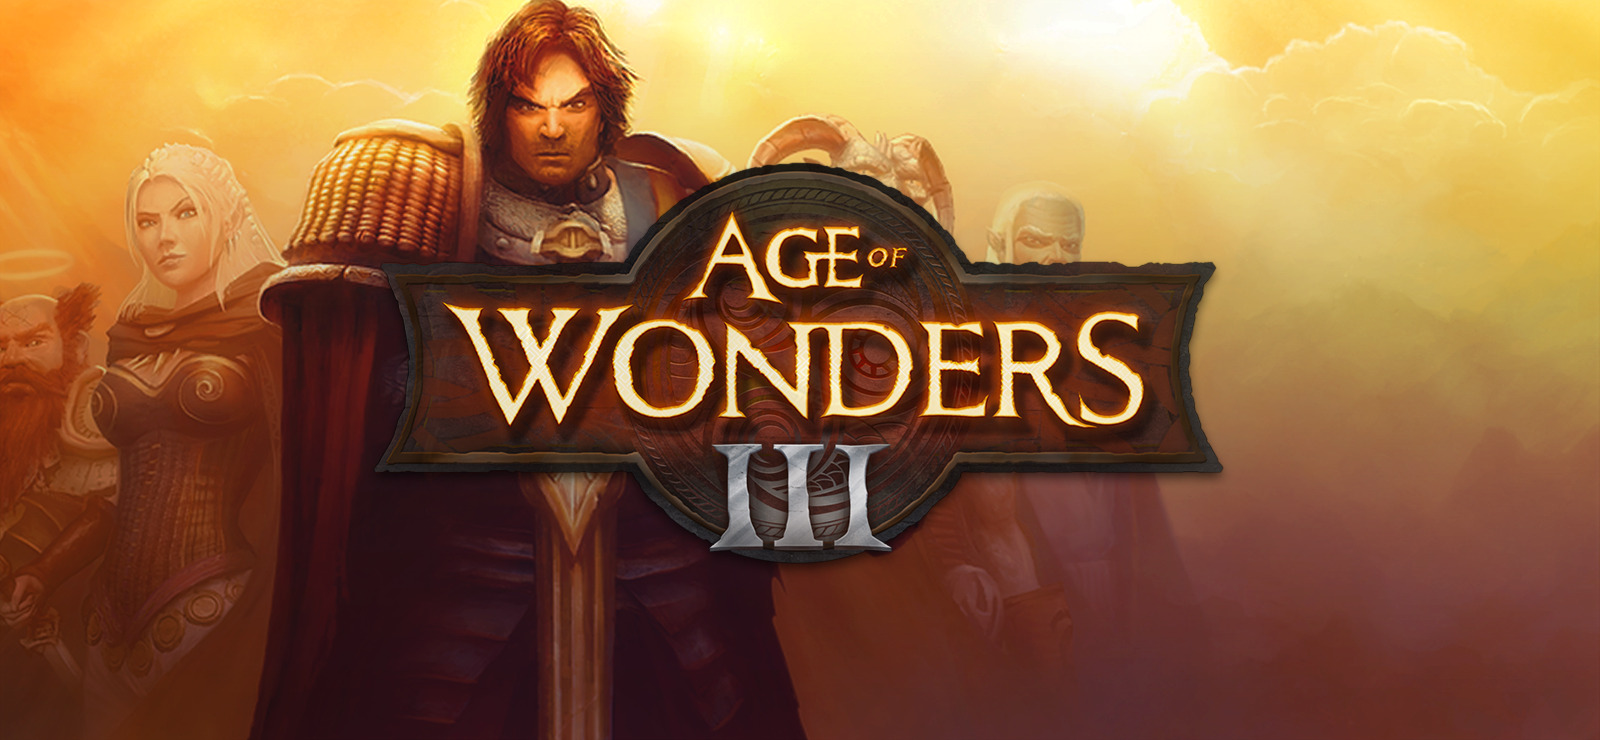 difference between age of wonders 3 and deluxe edition